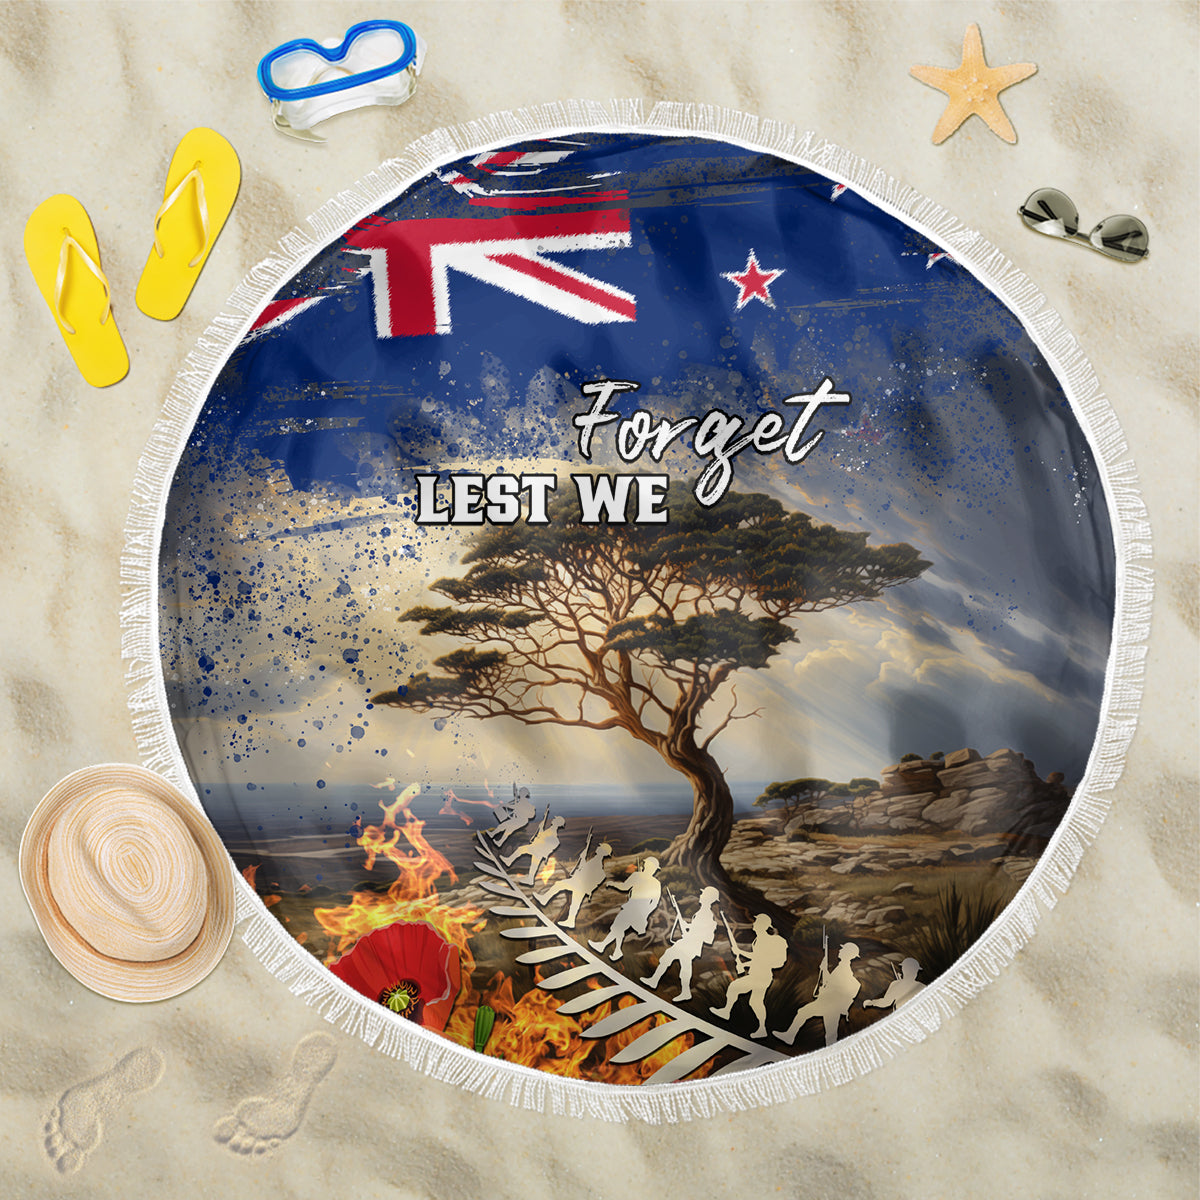 New Zealand ANZAC Day Beach Blanket The Lonesome Pine With Soldier Fern LT05 One Size 150cm Blue - Polynesian Pride